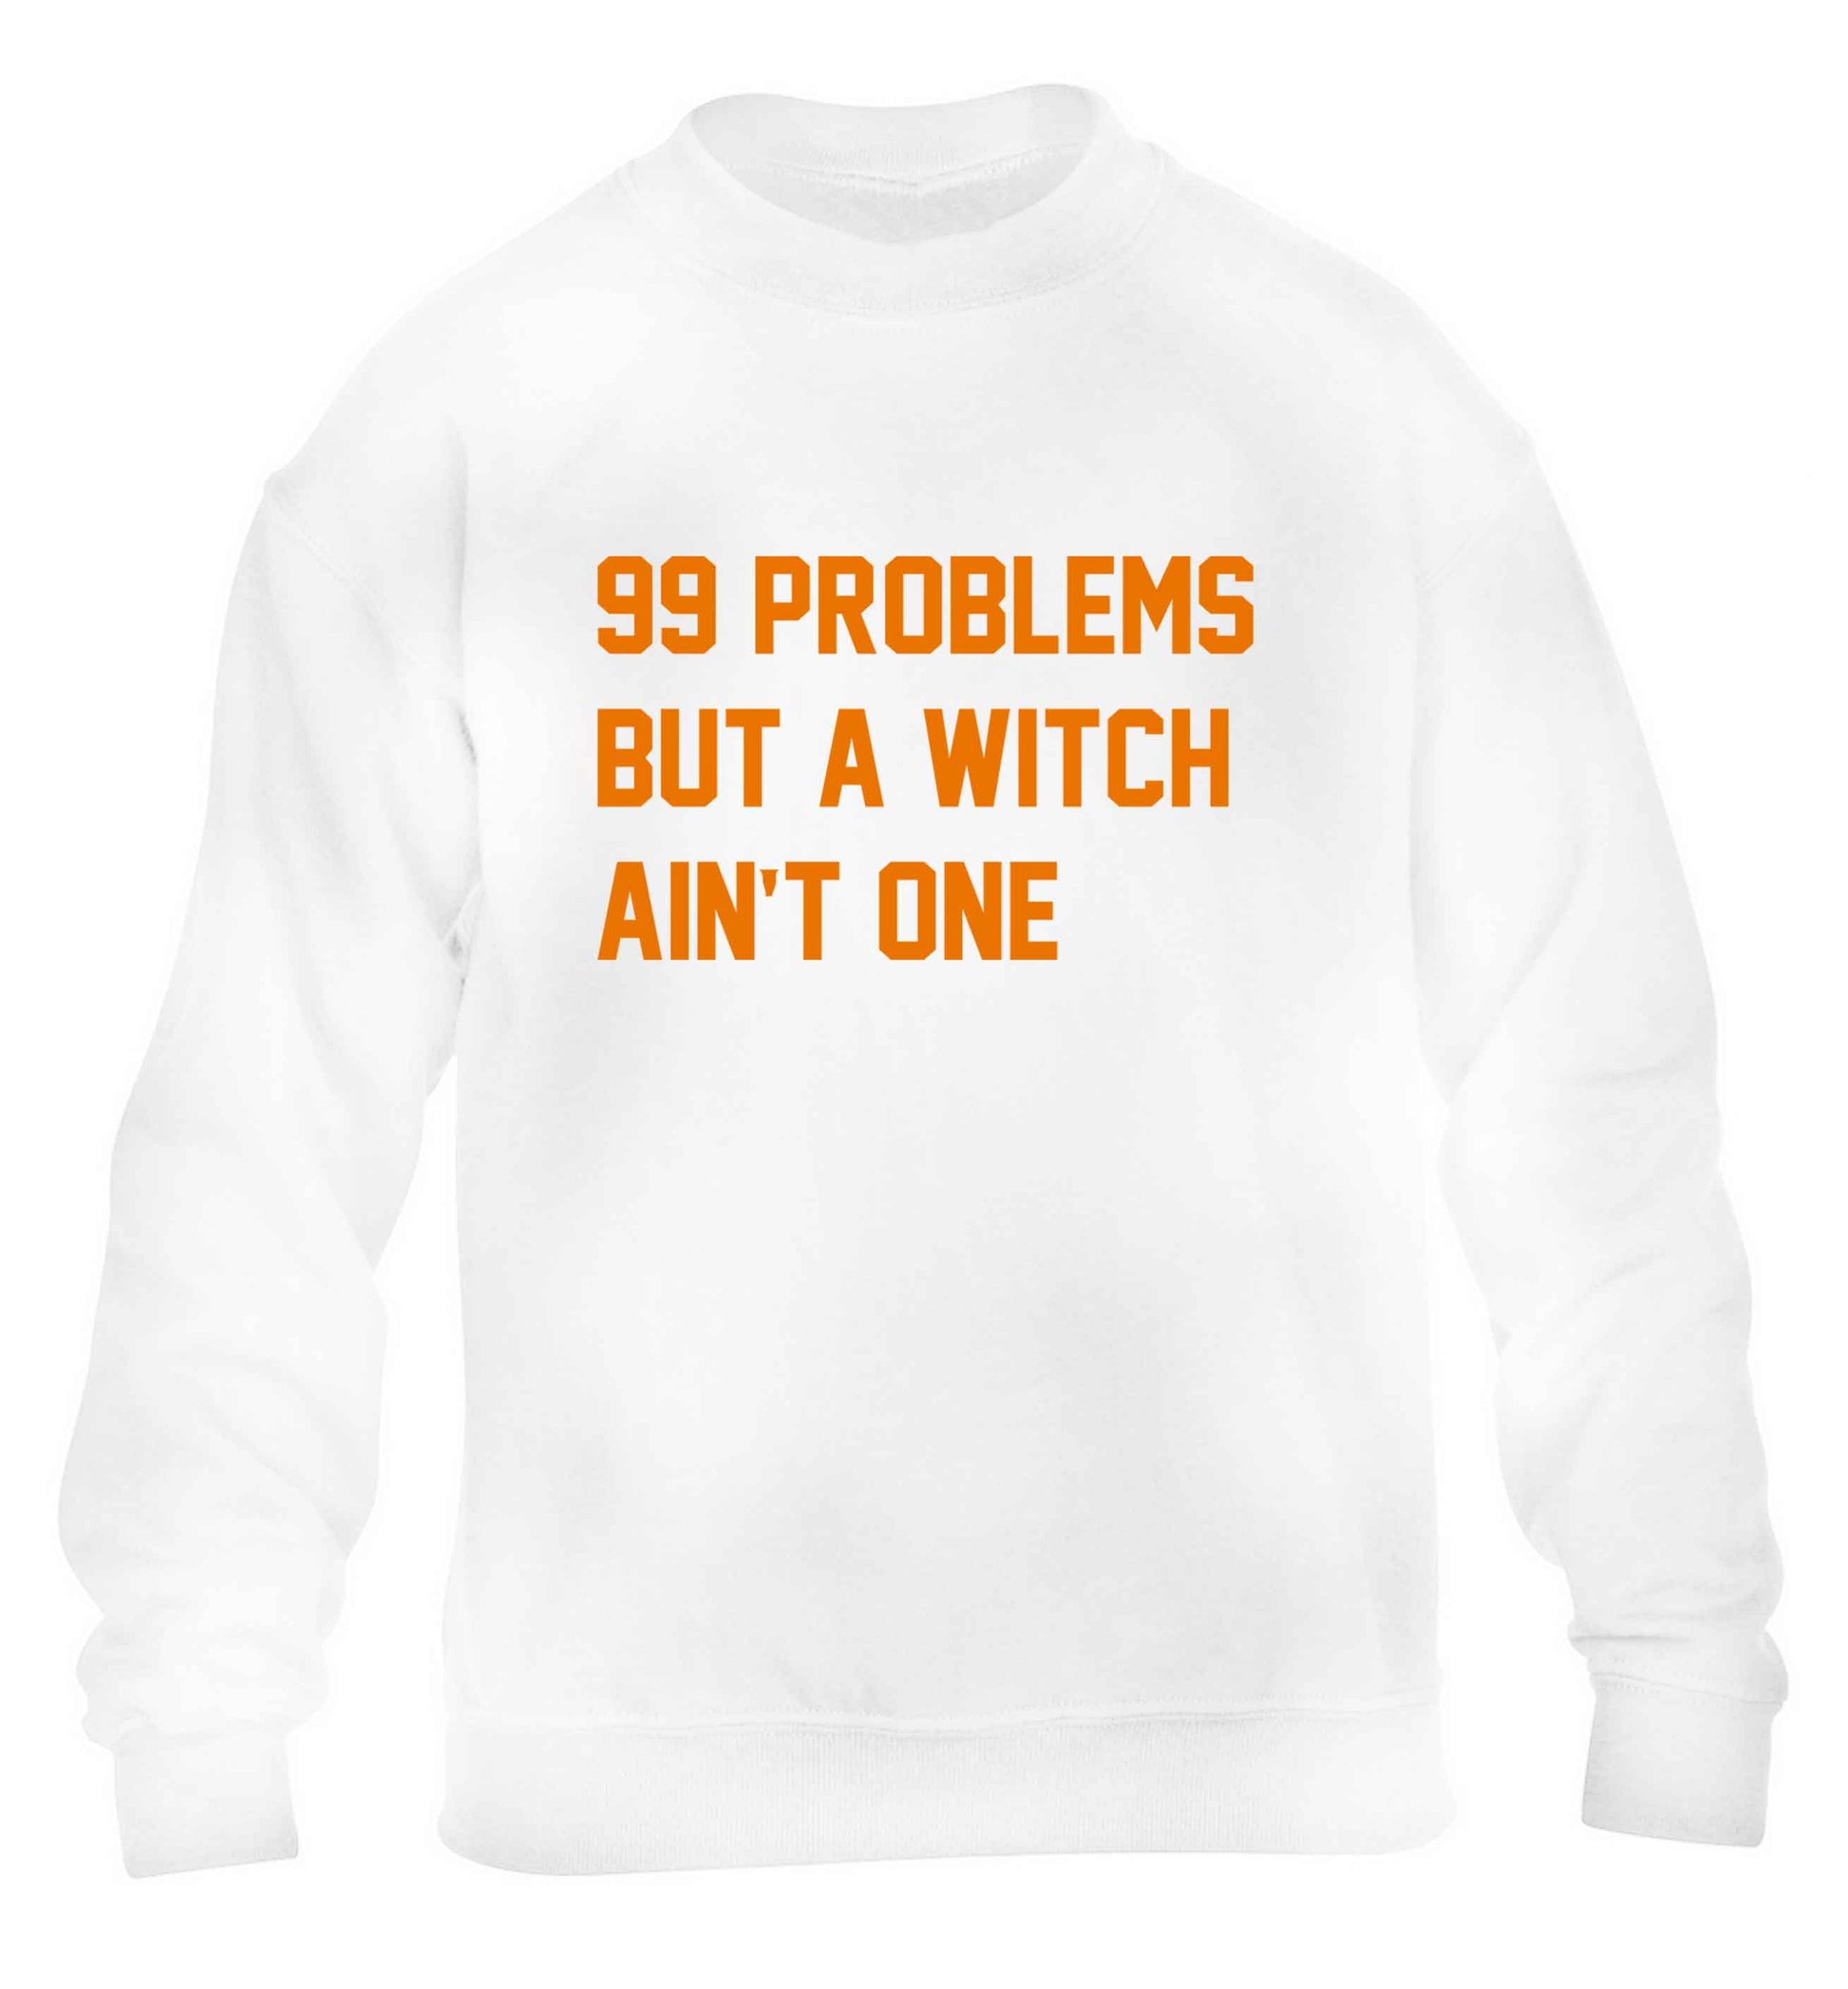 99 Problems but a witch aint one children's white sweater 12-13 Years